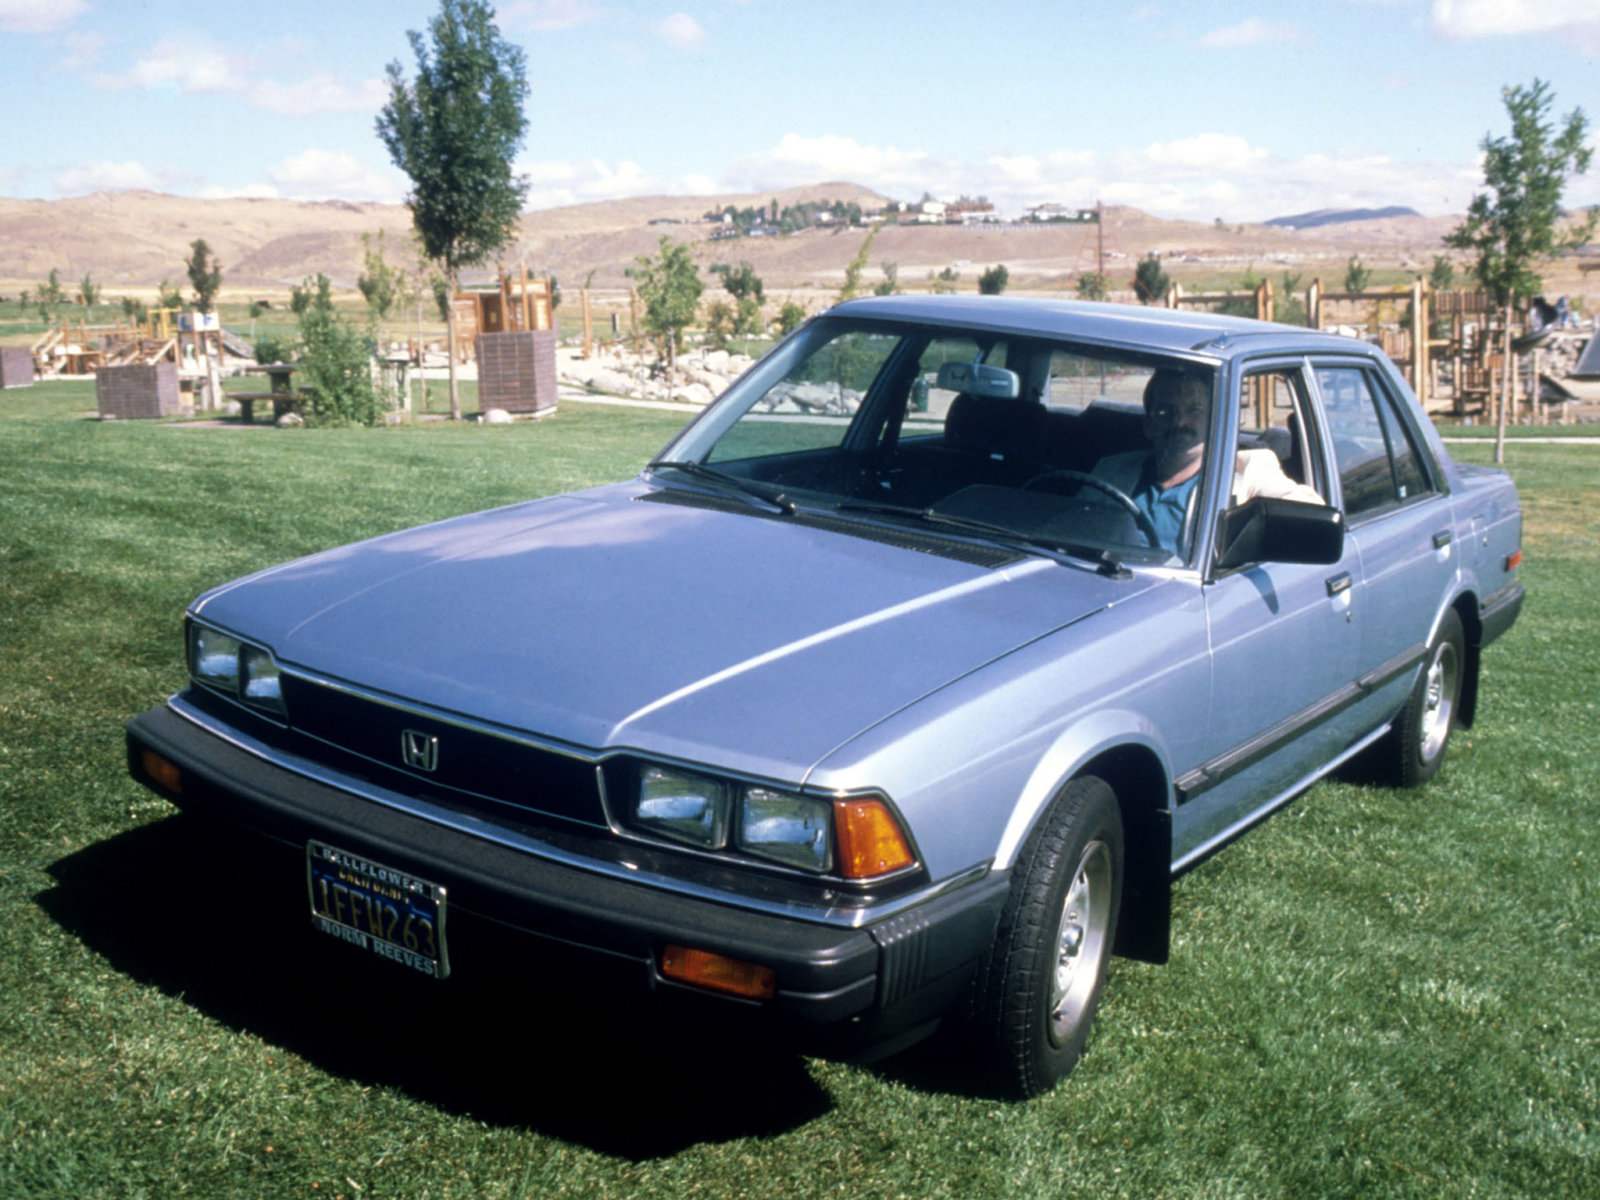 II 1981 Honda Accord here. produced in America (Ohio), navoyevat the title of best Japanese car in Europe. The car had a fuel injected 1.8-liter engine, ABS system cruise control automatic transmission and system of levelling